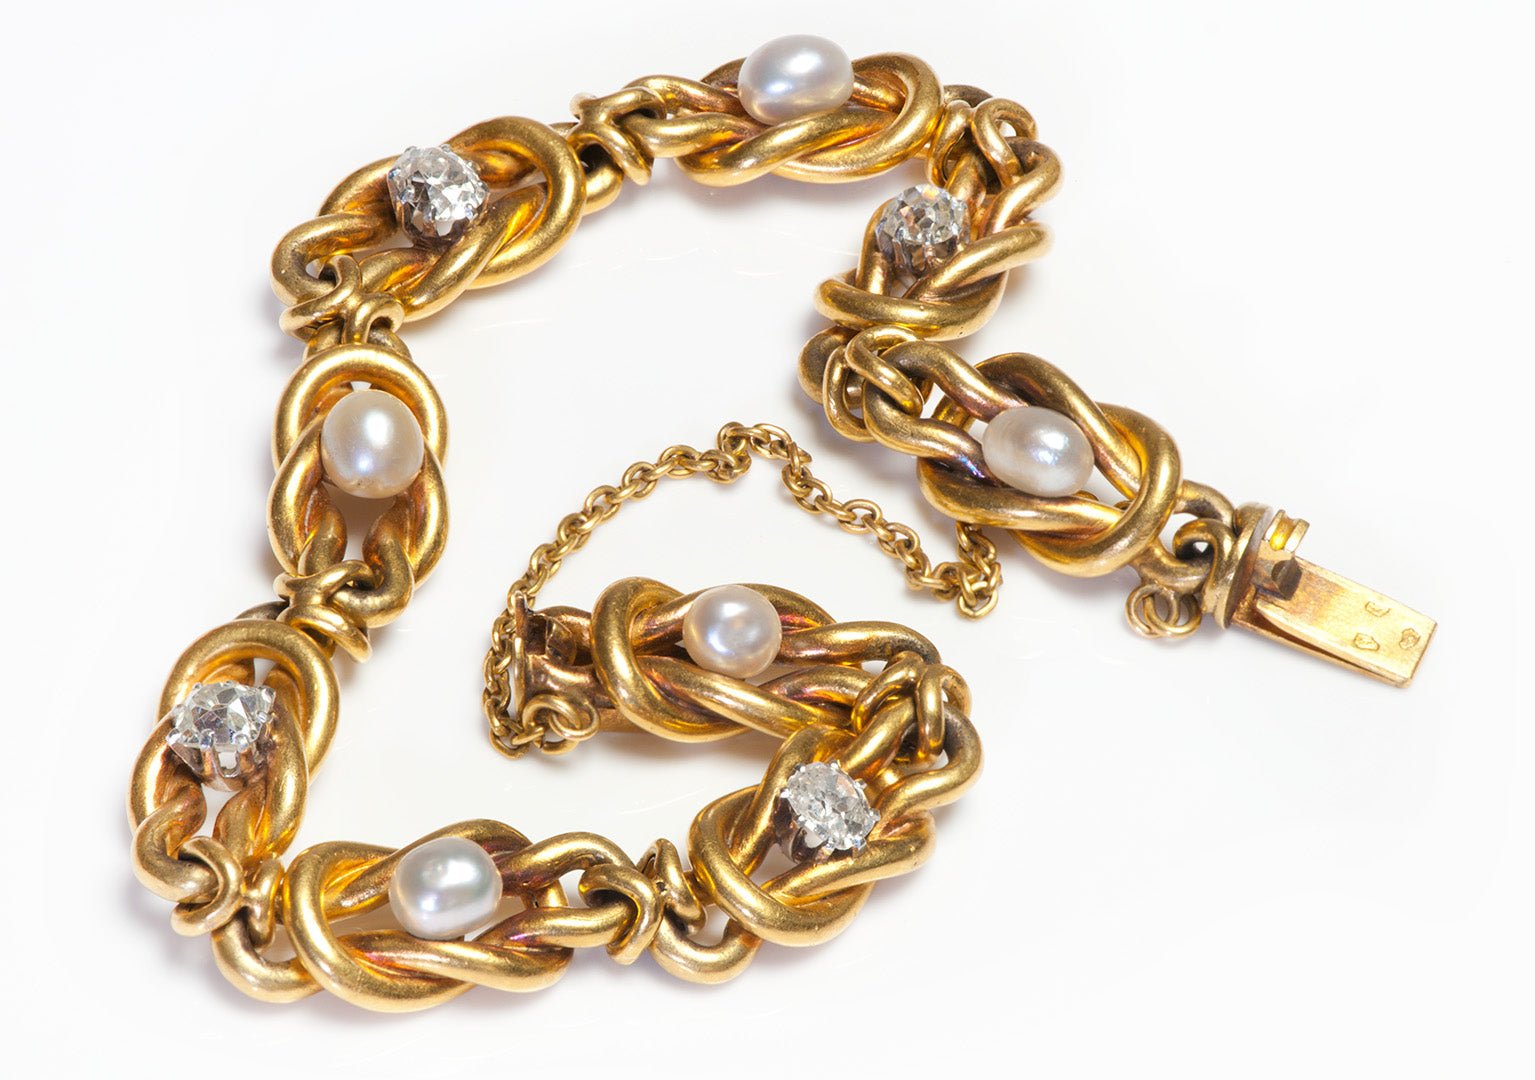 Antique French 18K Gold Old Mine Cut Diamond Pearl Knot Bracelet - DSF Antique Jewelry